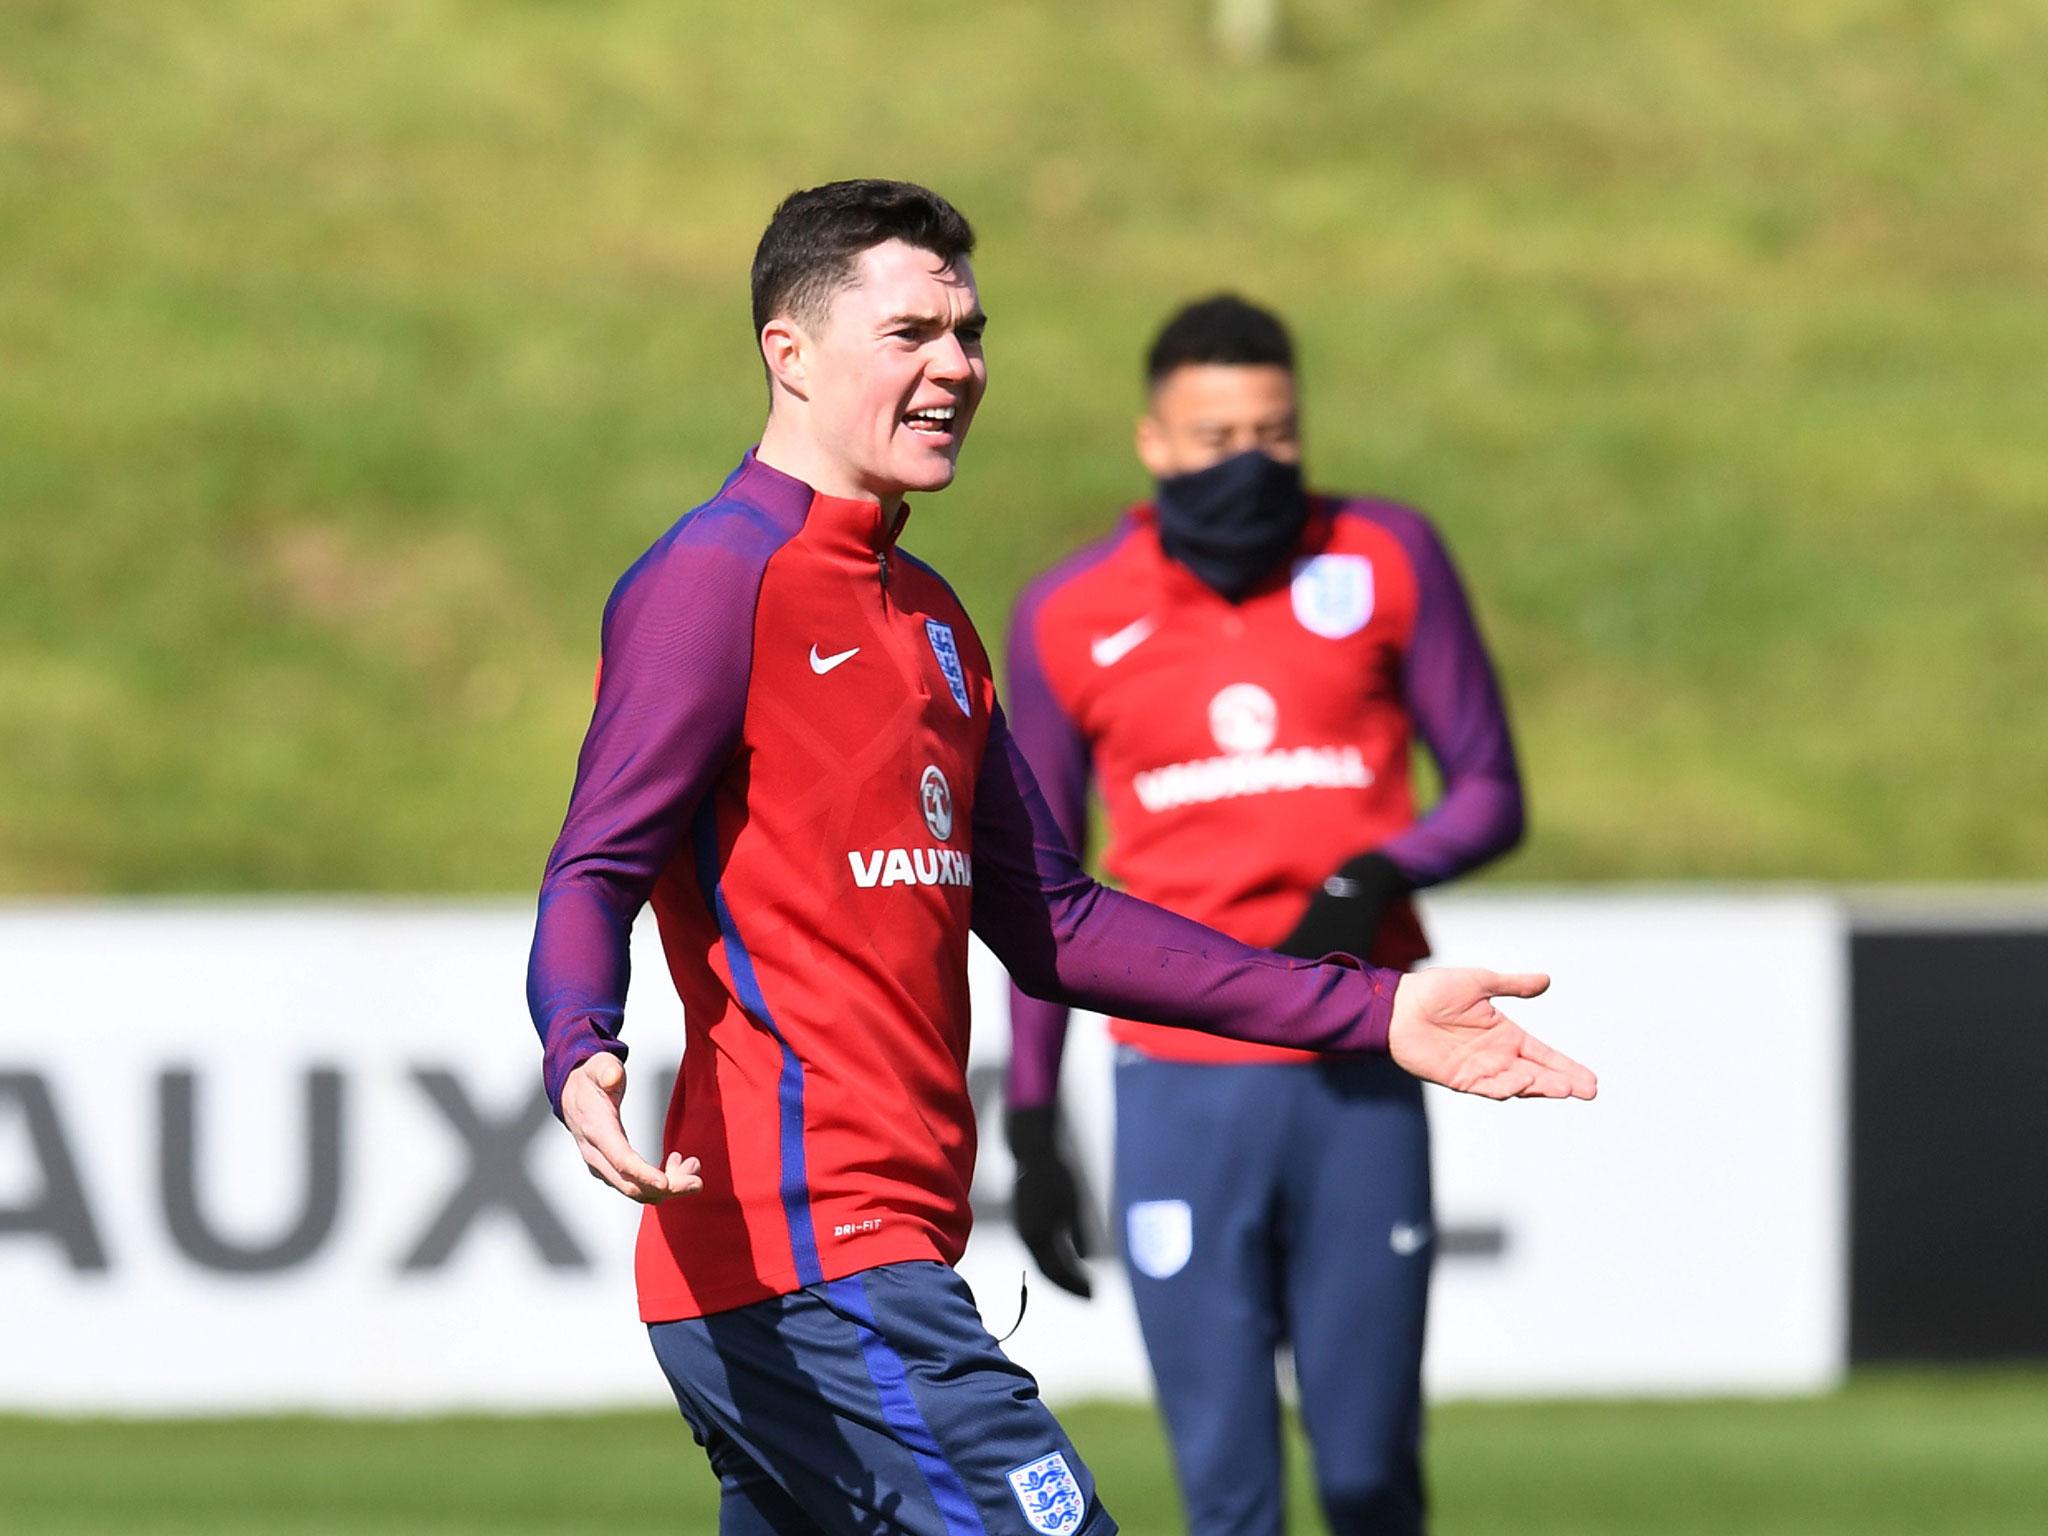 Michael Keane will win his first cap against Germany